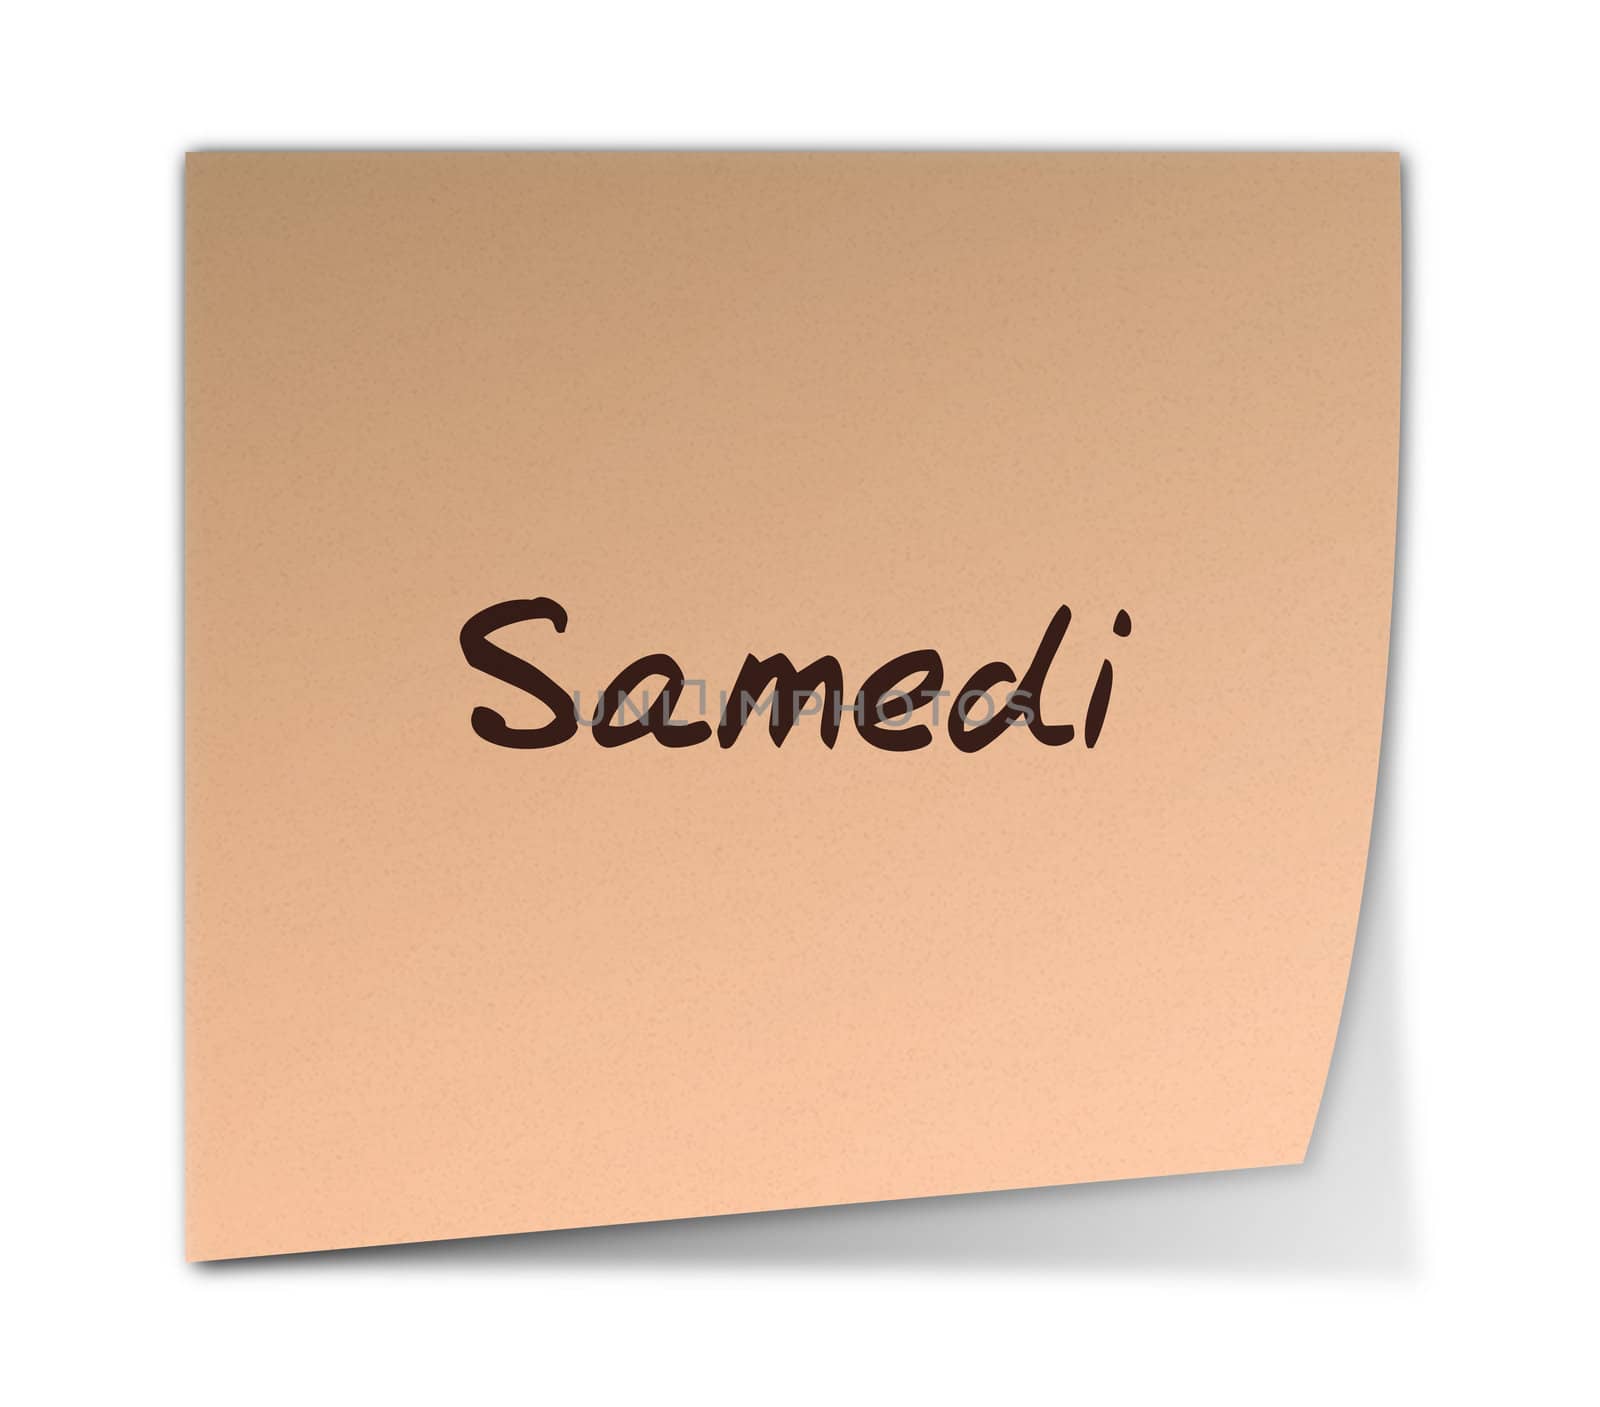 Color Paper Note With Saturday Text in French (jpeg file has clipping path)